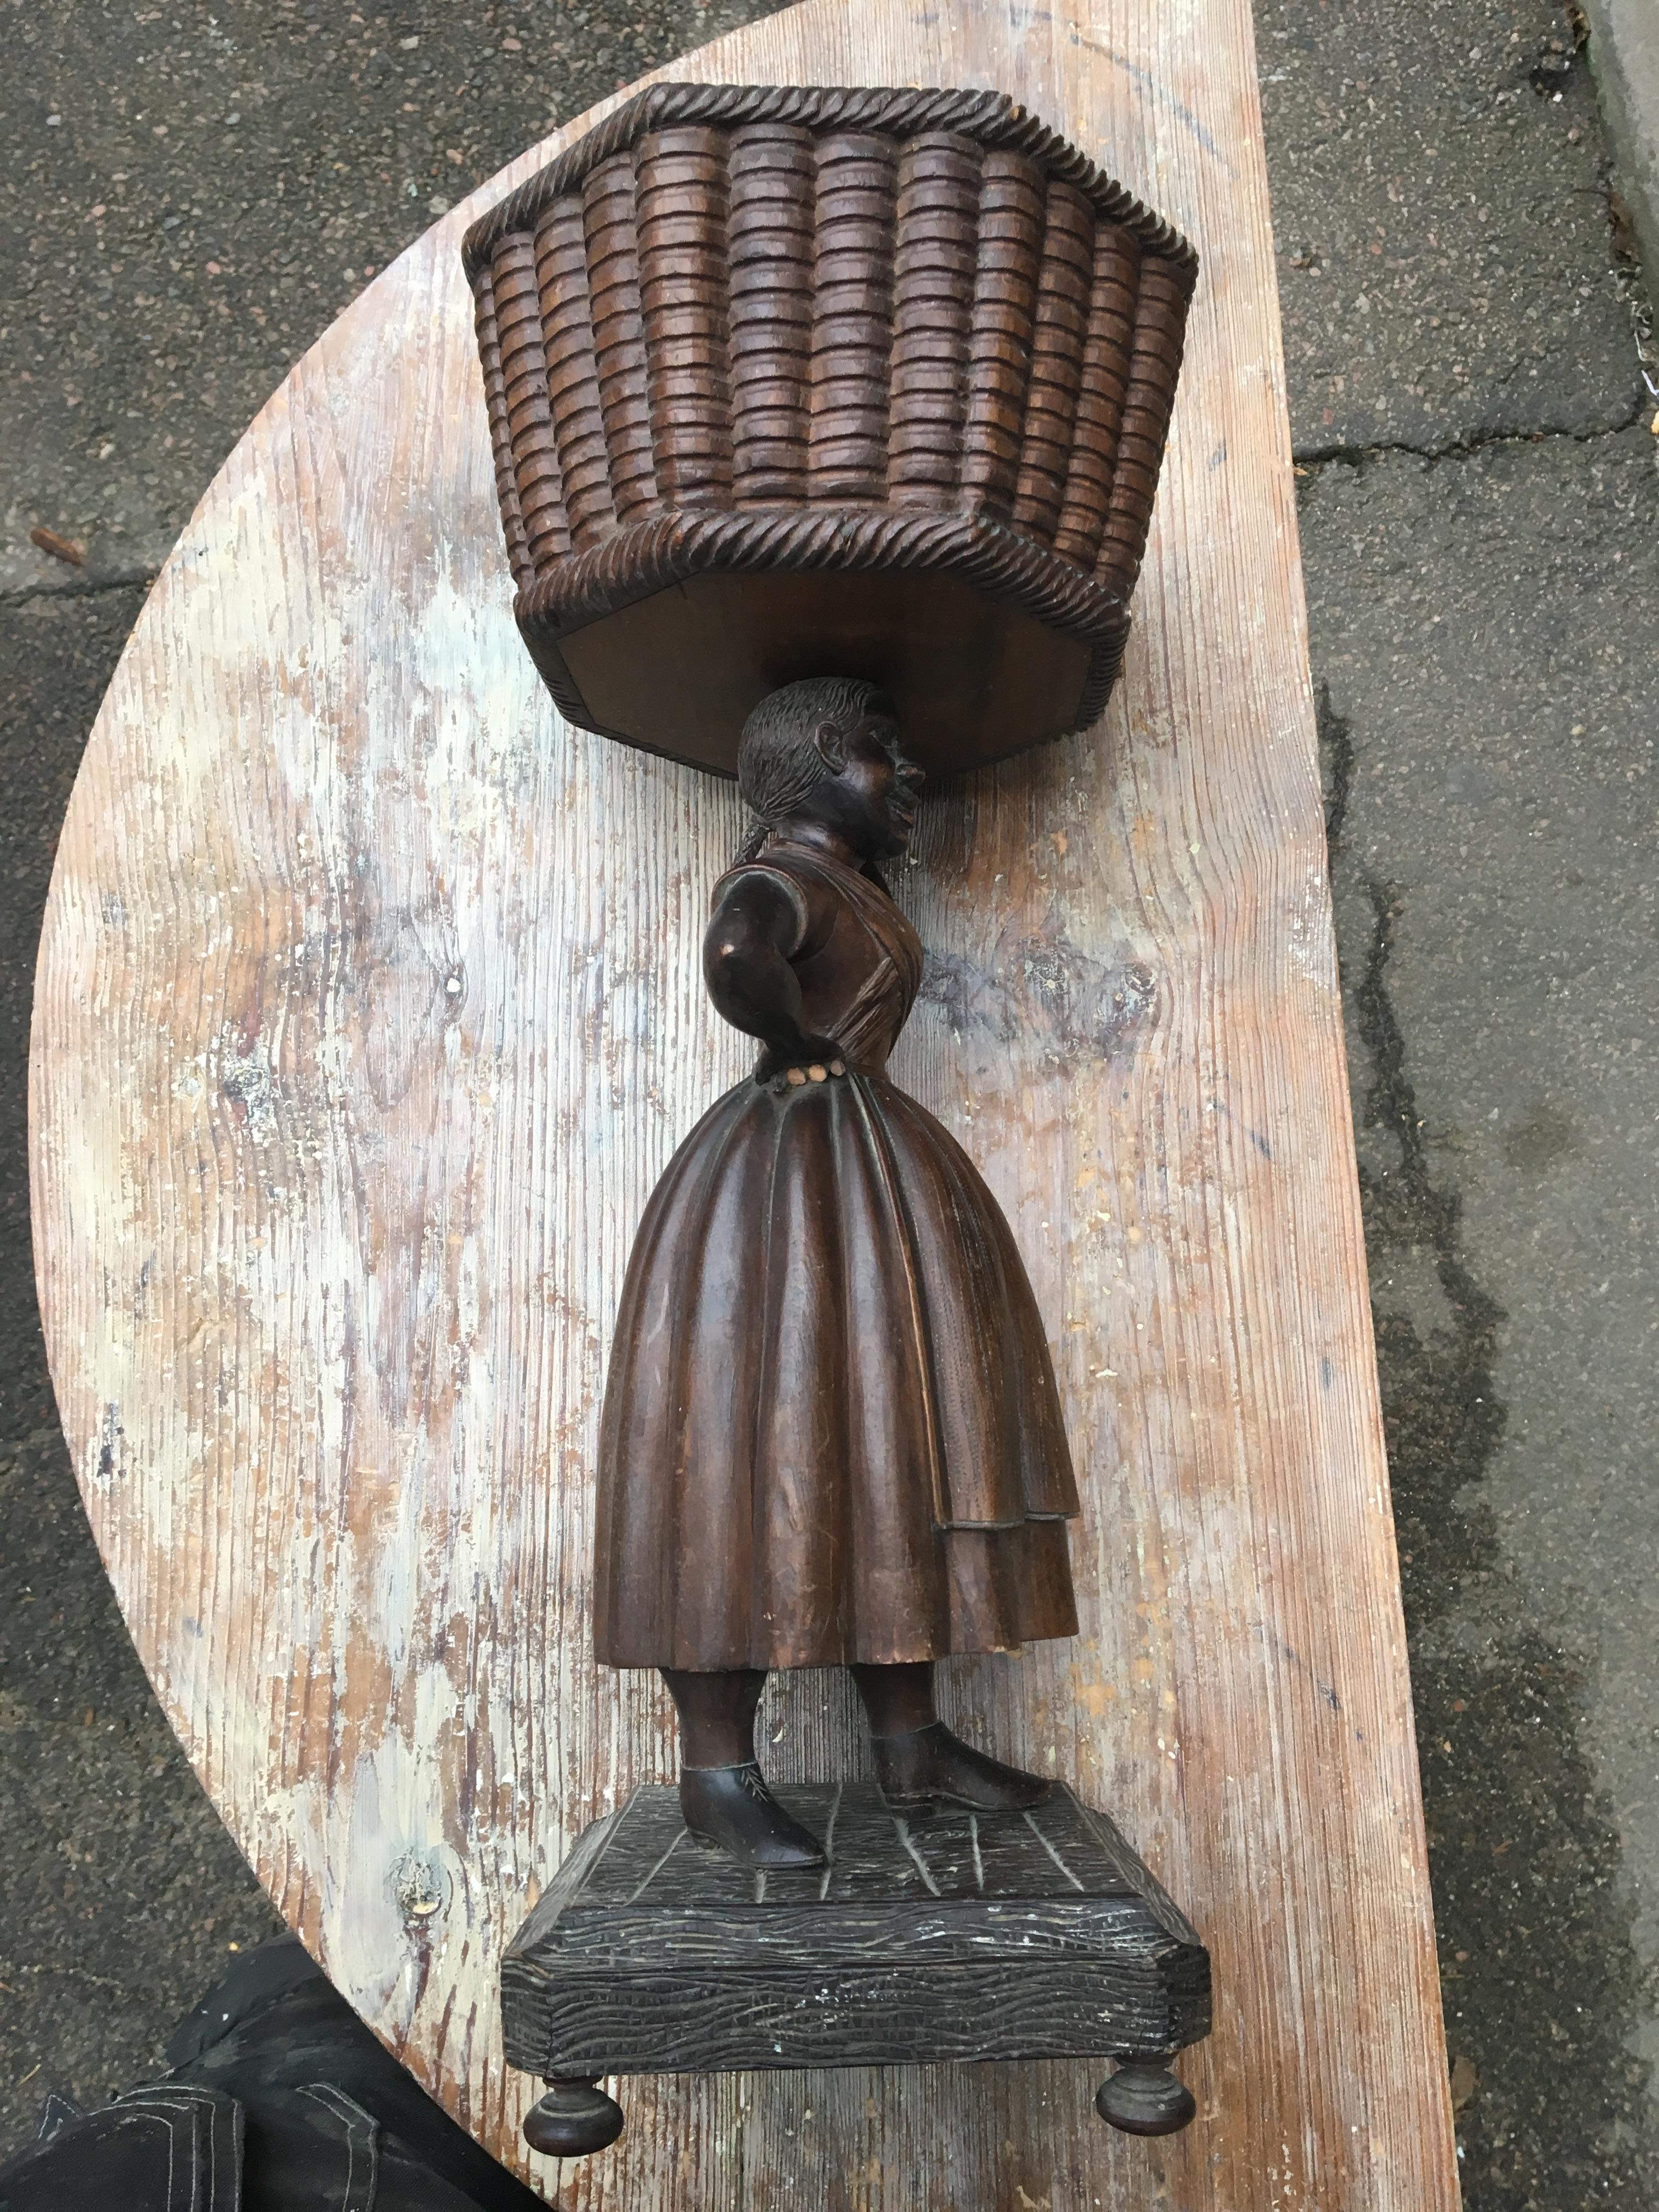 French Early Wooden Sculpture Of Basket-Carrying Lady